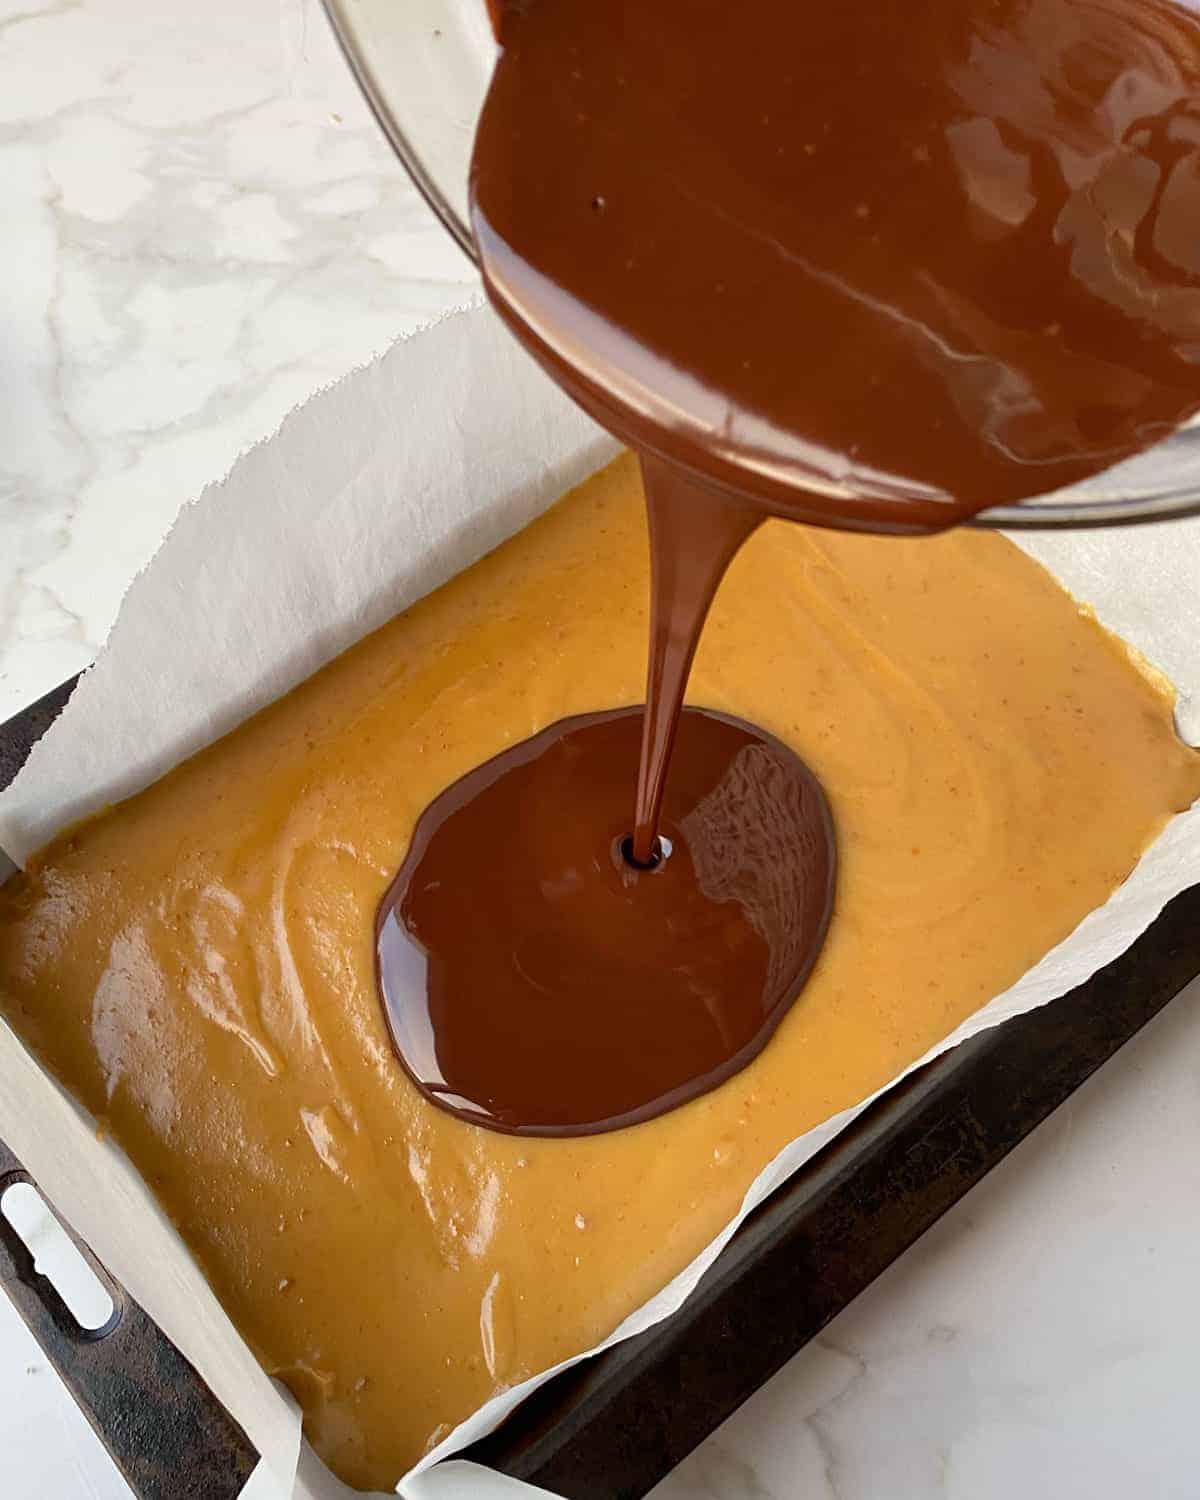 Chocolate being poured onto caramel in a lined baking tray.